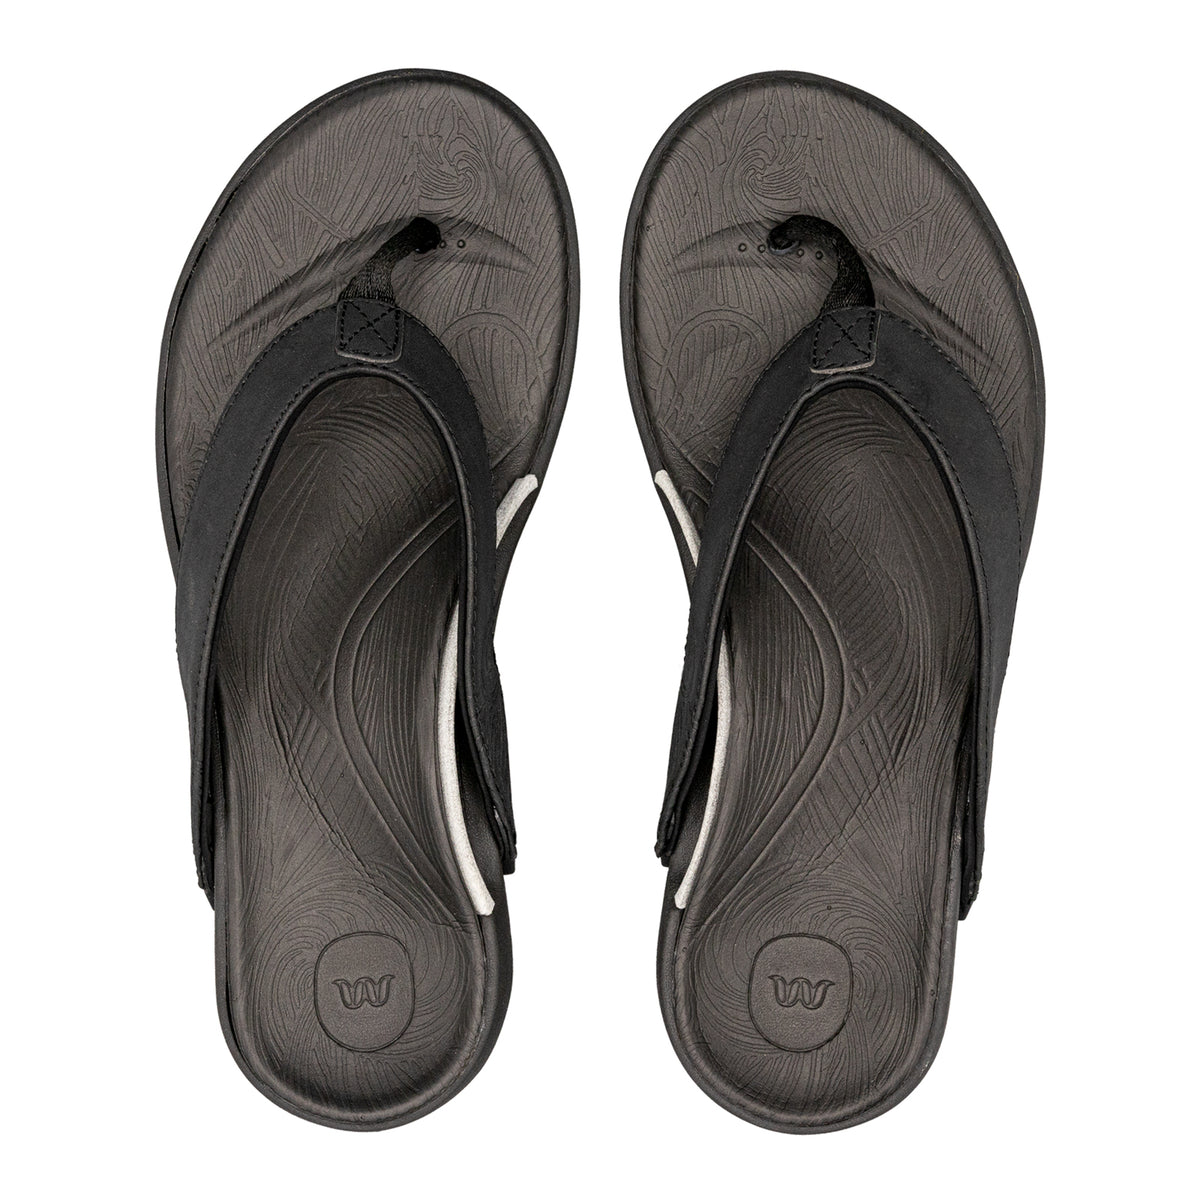 Life Stride Simply Comfort Thong Flip Flop Sandals Silver Gray Womens Size  7.5 M 